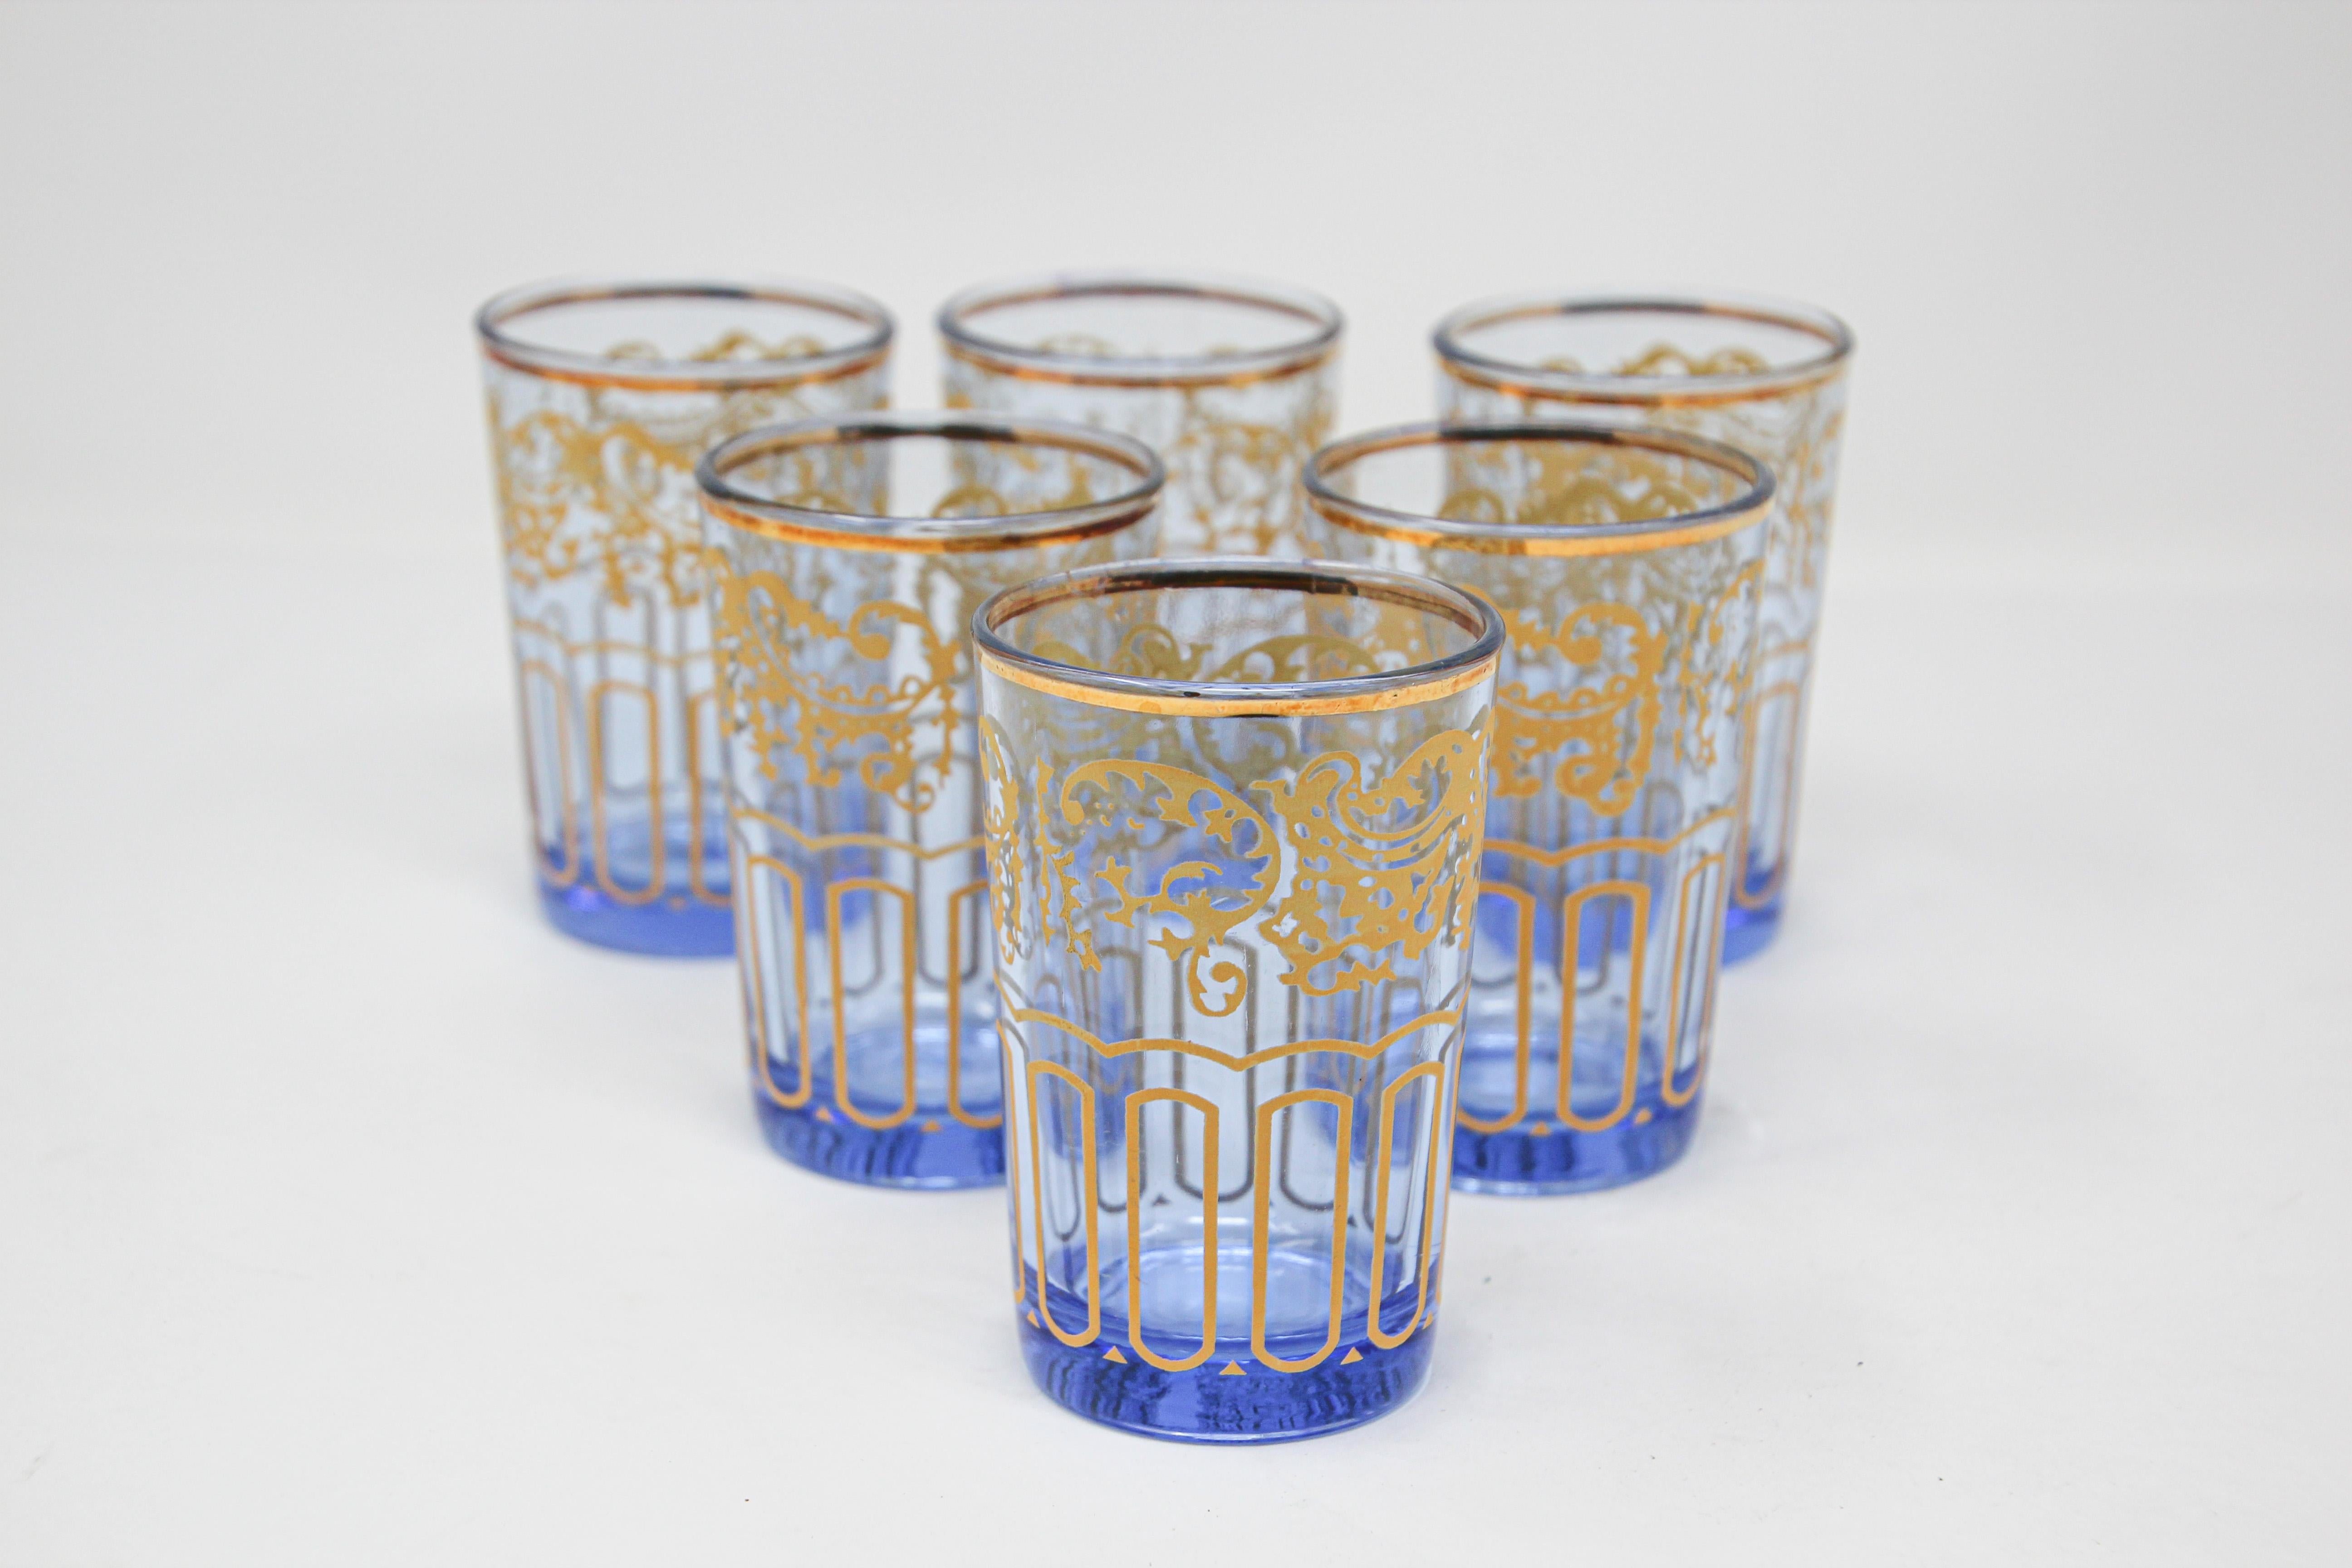 Set of six Moroccan blue glasses with gold raised Moorish design.
Decorated with a classical gold and pattern Moorish frieze. 
Use these elegant glasses for Moroccan tea, or any hot or cold drink.
In fantastic condition, perfect for the holidays and